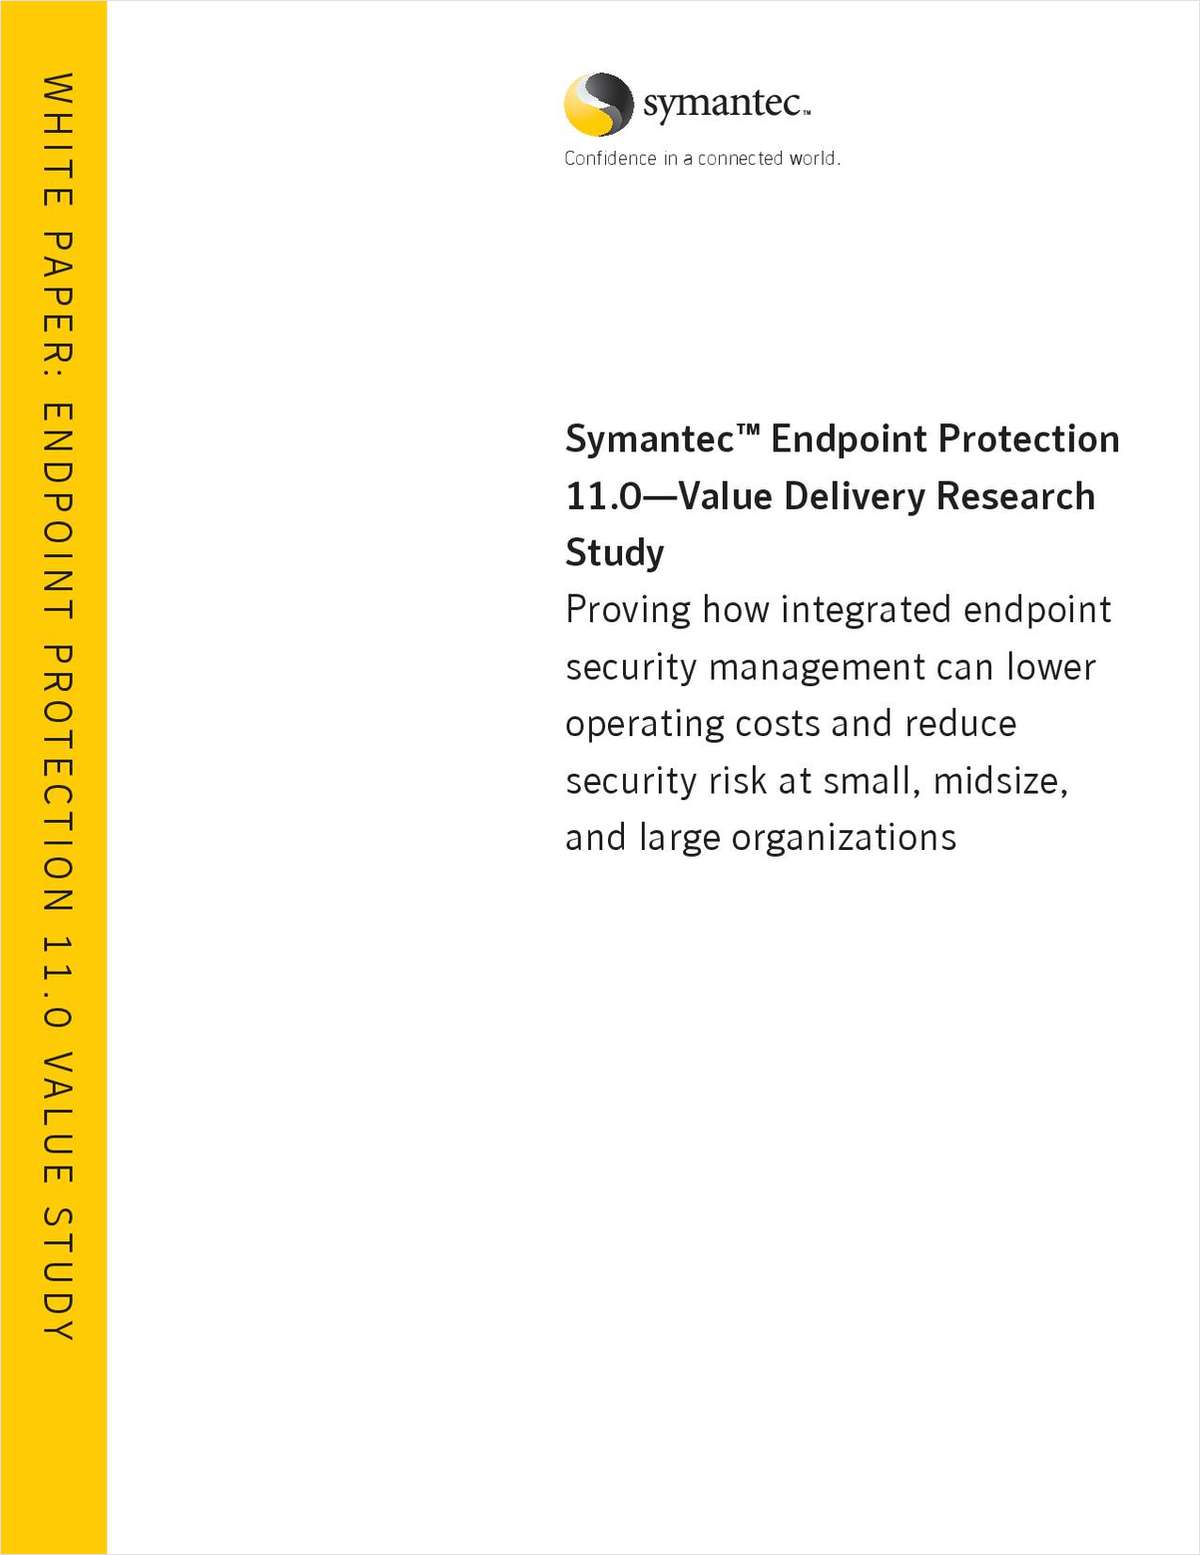 Symantec™ Endpoint Protection 11.0—Value Delivery Research Study